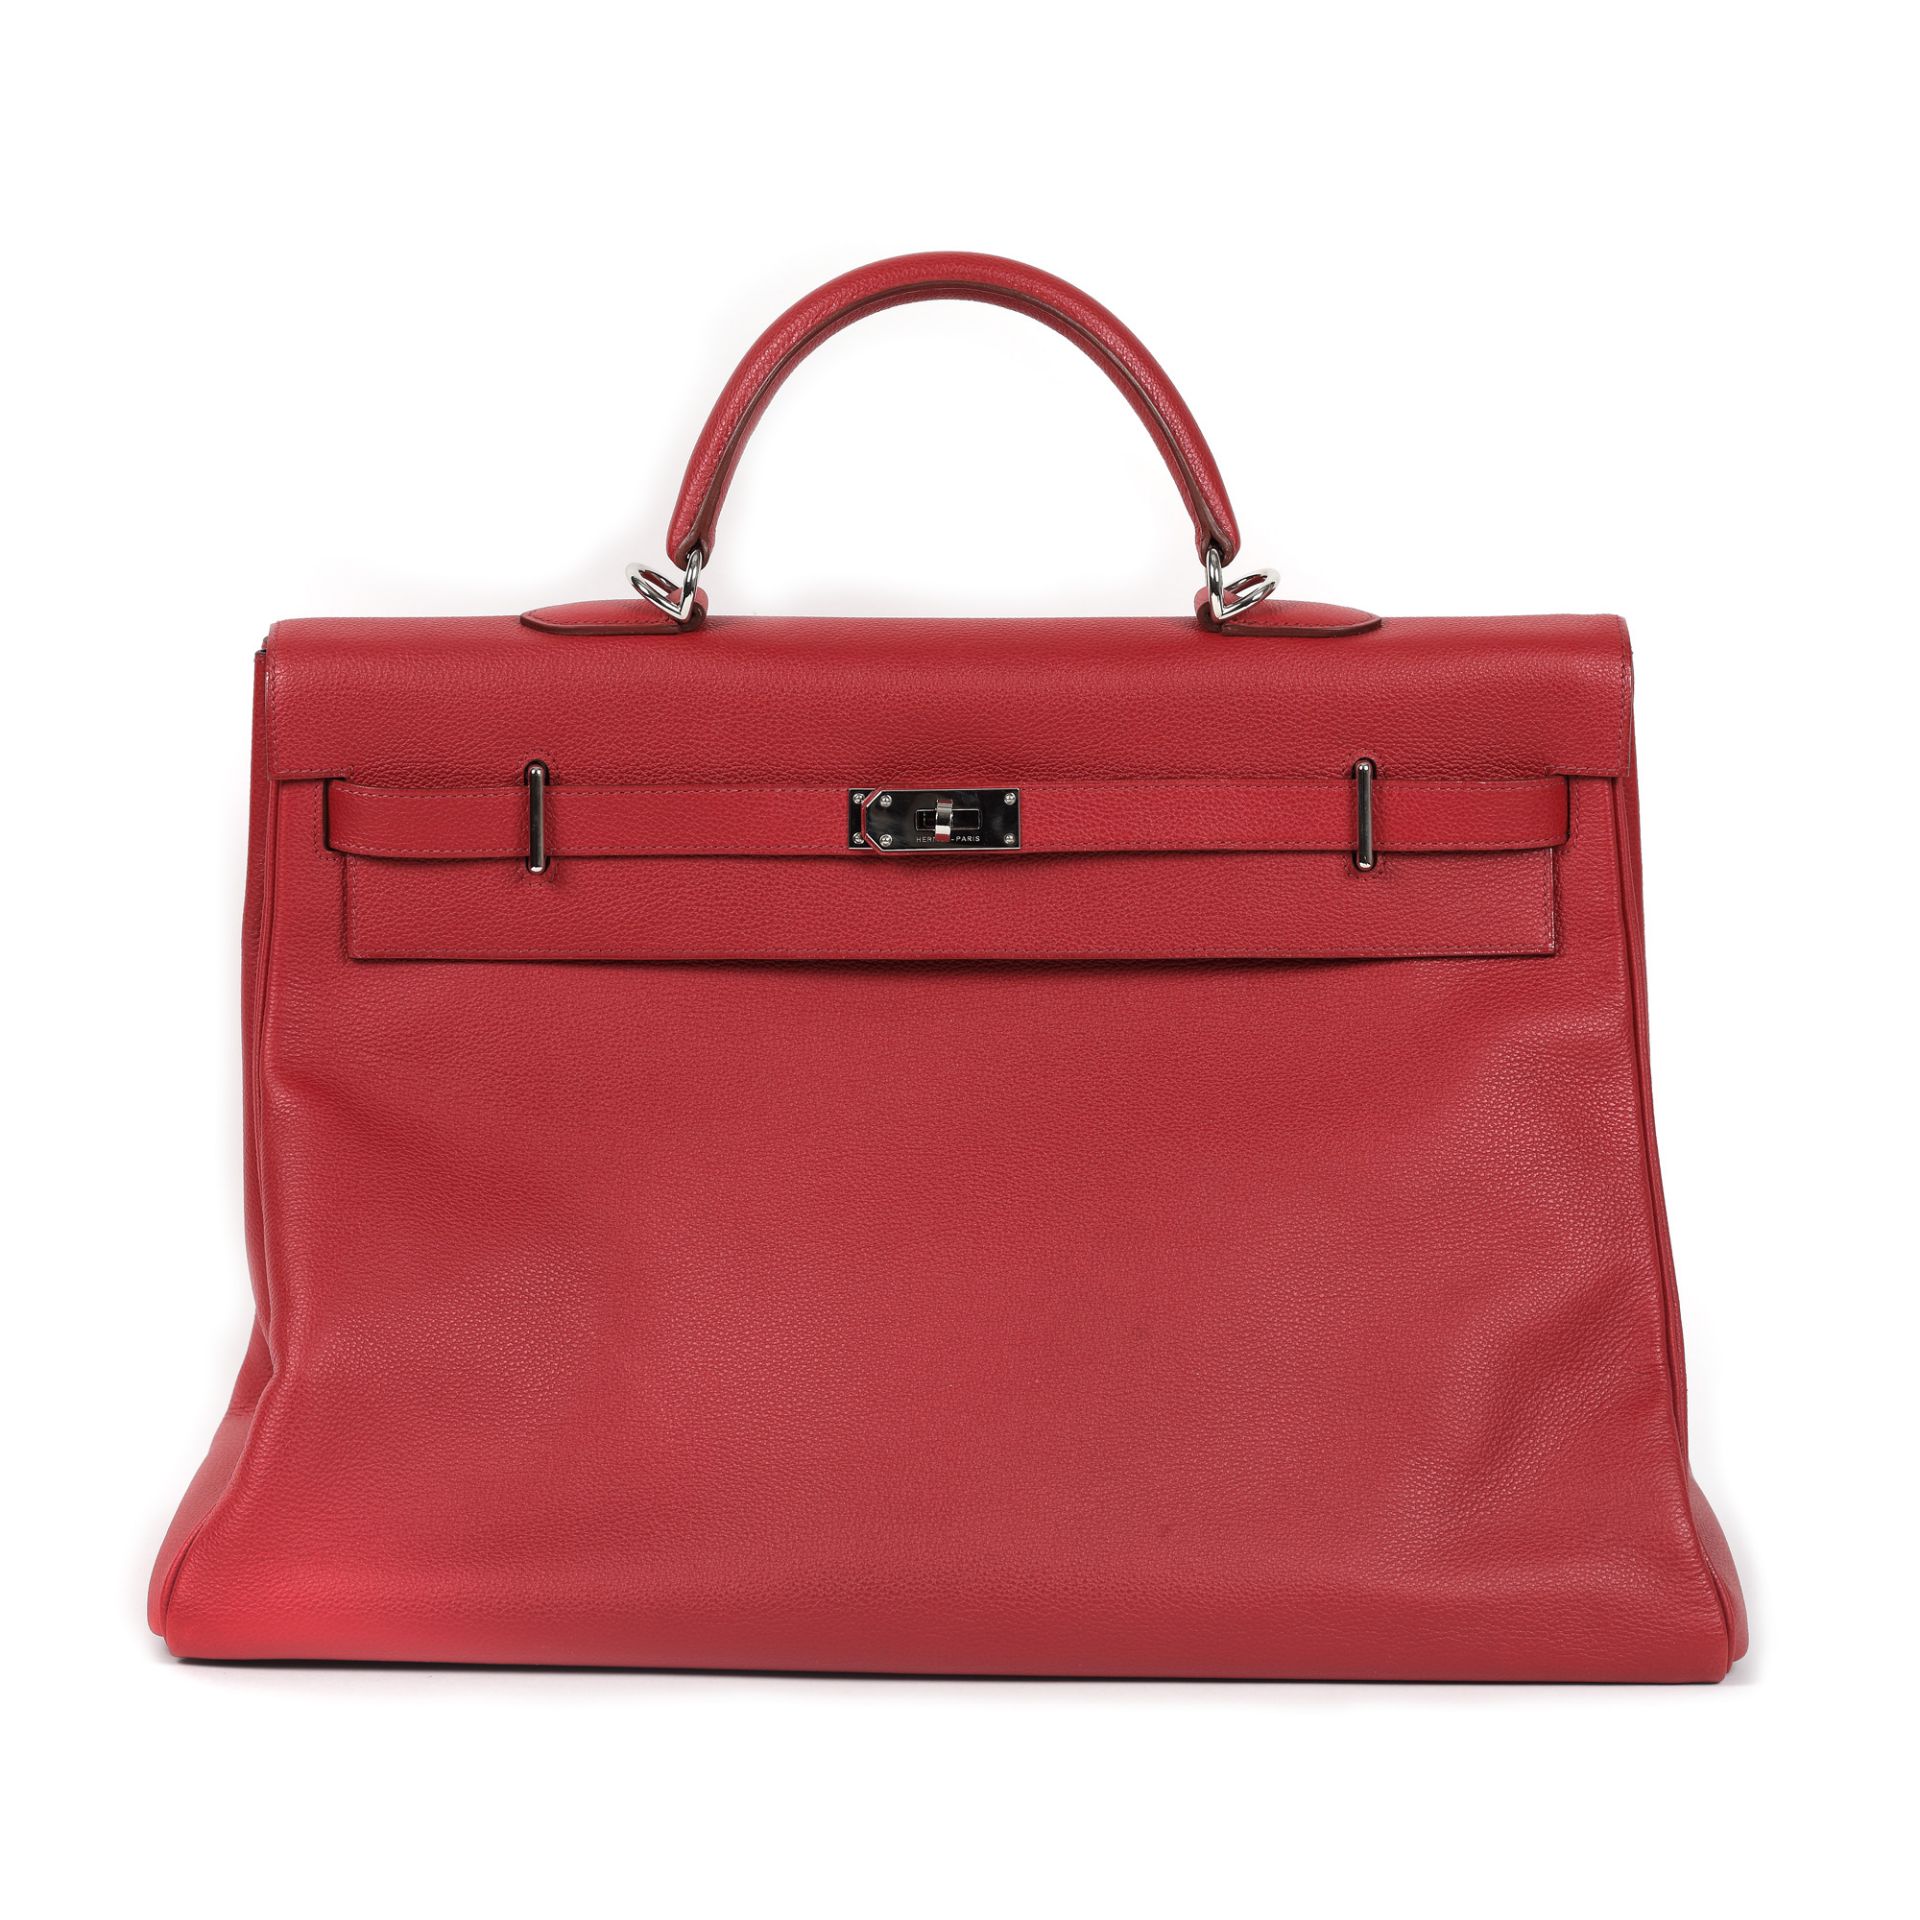 "Kelly Voyage" - Hermès travel bag, Clemence leather, Rouge Garance colour, limited edition